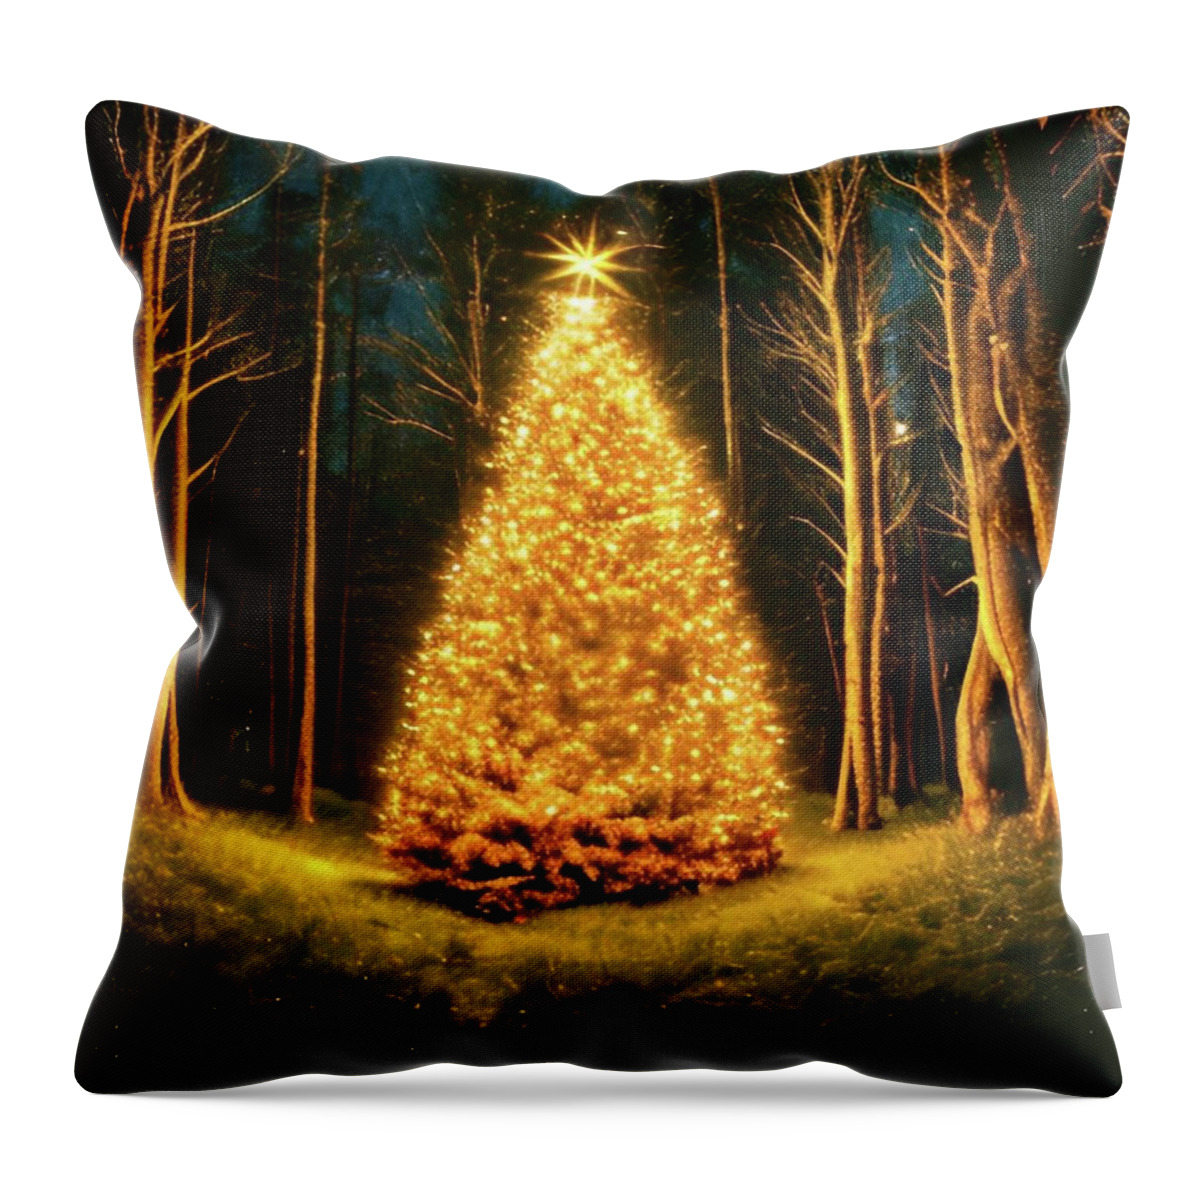 God Throw Pillow featuring the digital art Christmas Card No.18 by Fred Larucci